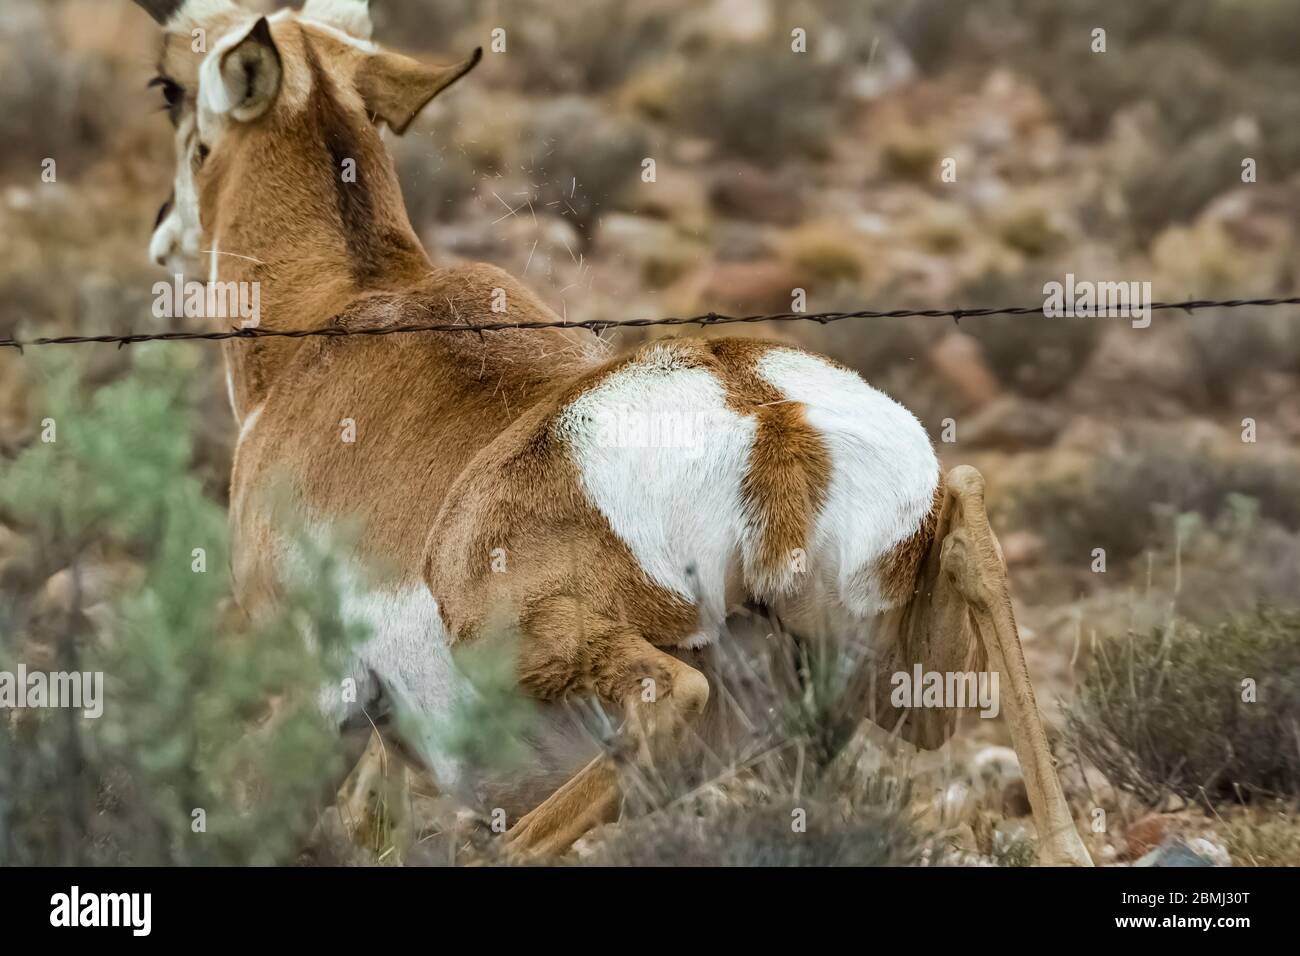 Pronghorn, Antilocapra americana, squeezing under barbed wire fence, scraping its back with hair airborne, near City of Rocks State Park, New Mexico, Stock Photo